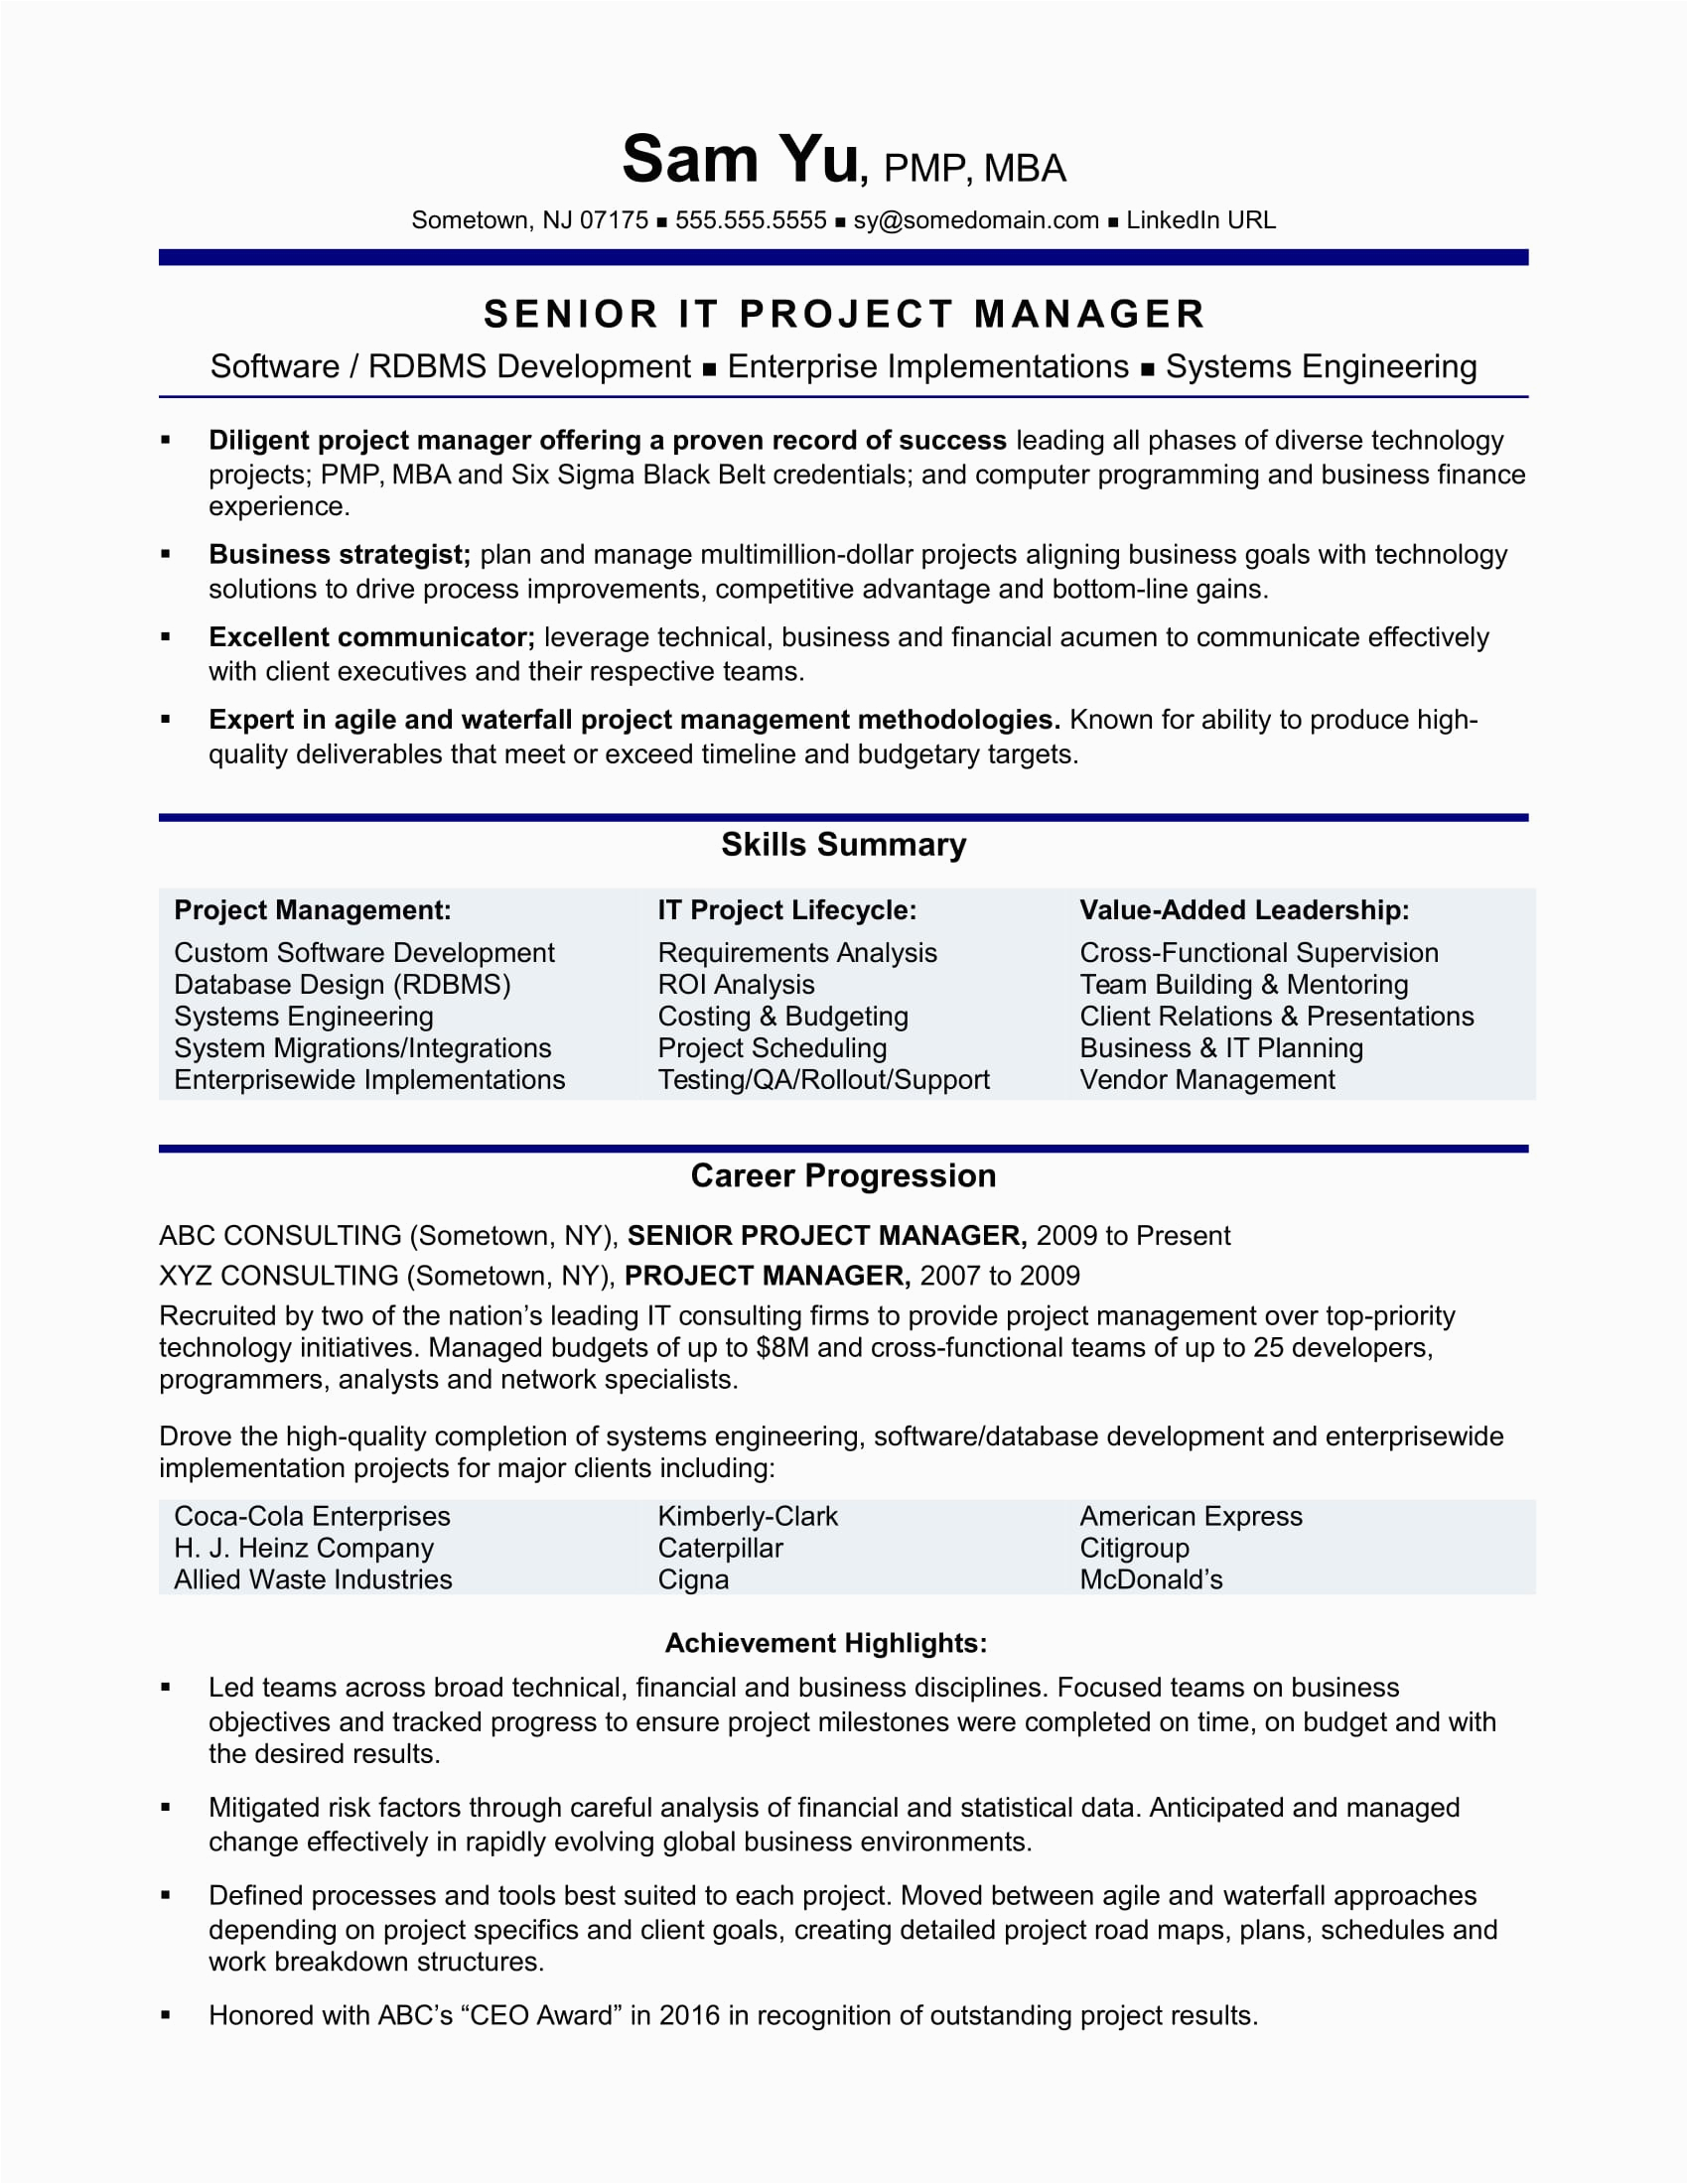 Software Industry Project Manager Sample Resume It Project Manager Resume